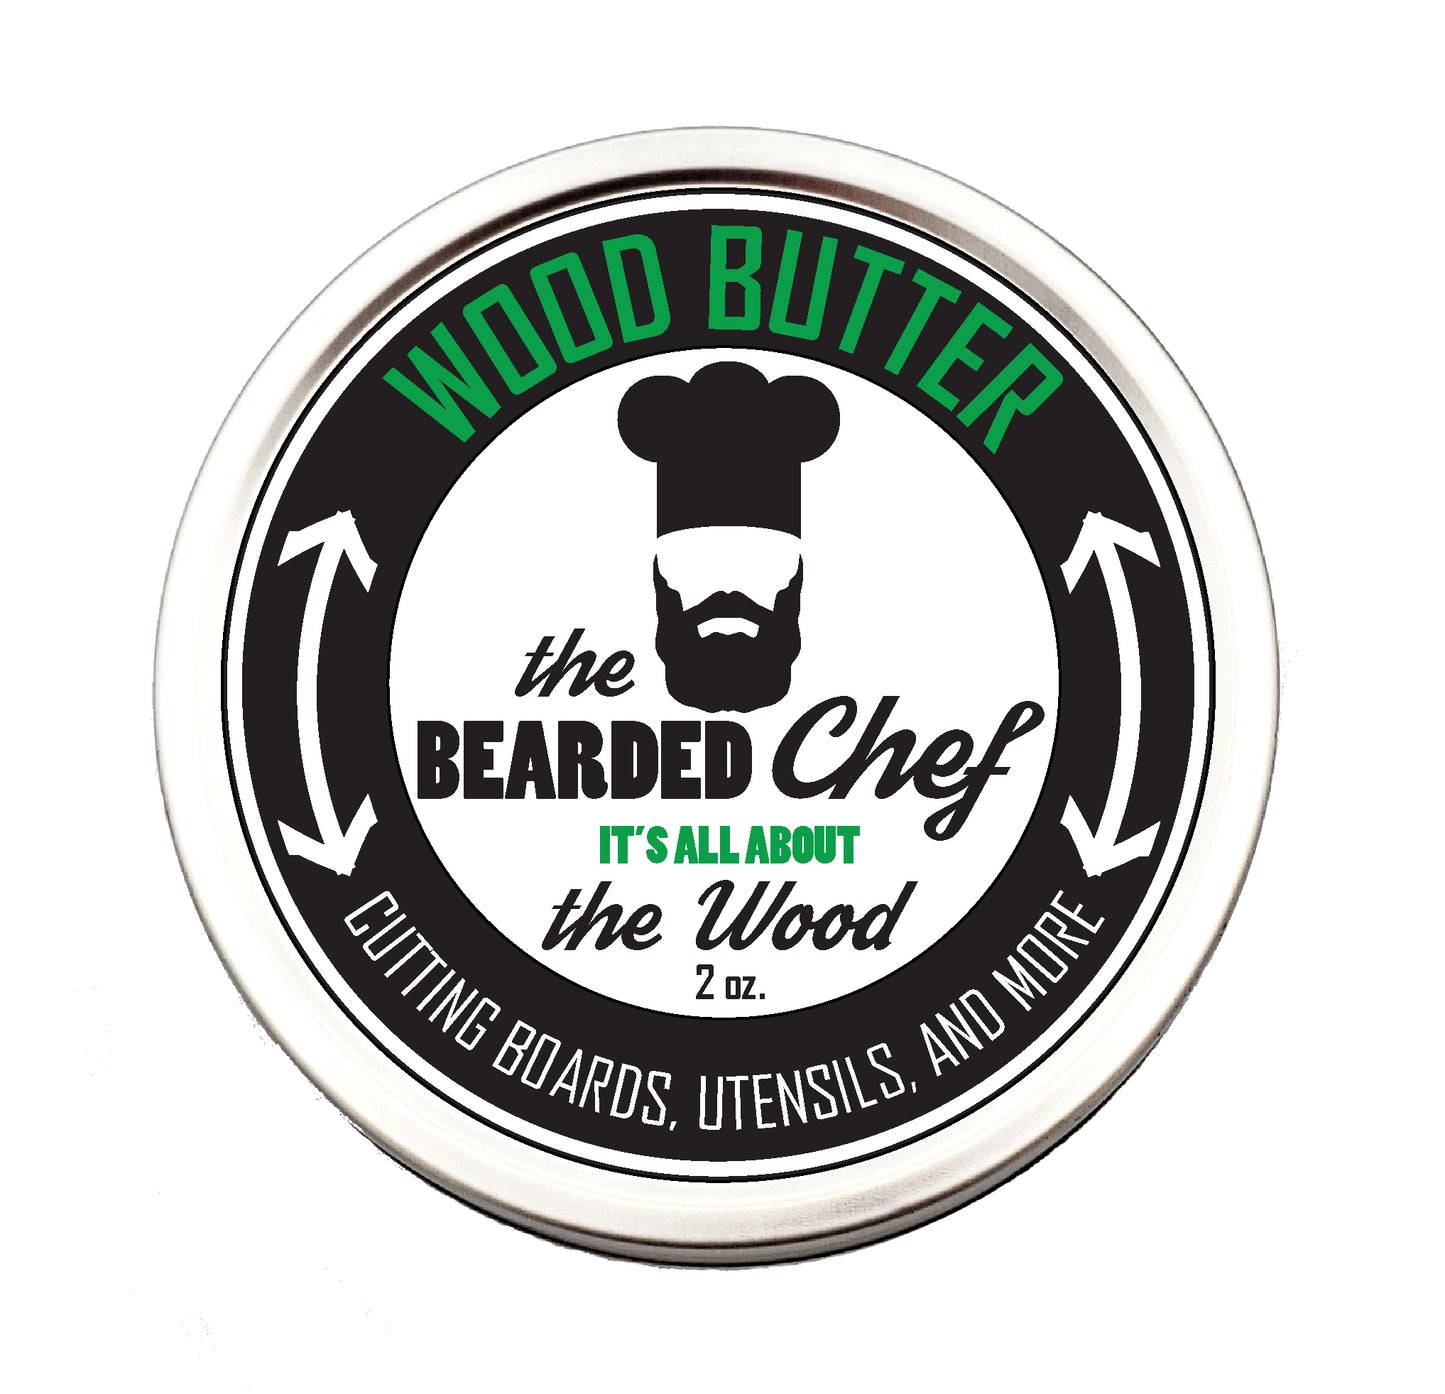 Wood Butter Protects and Conditions Cutting Boards, Butcher Blocks Made in the USA